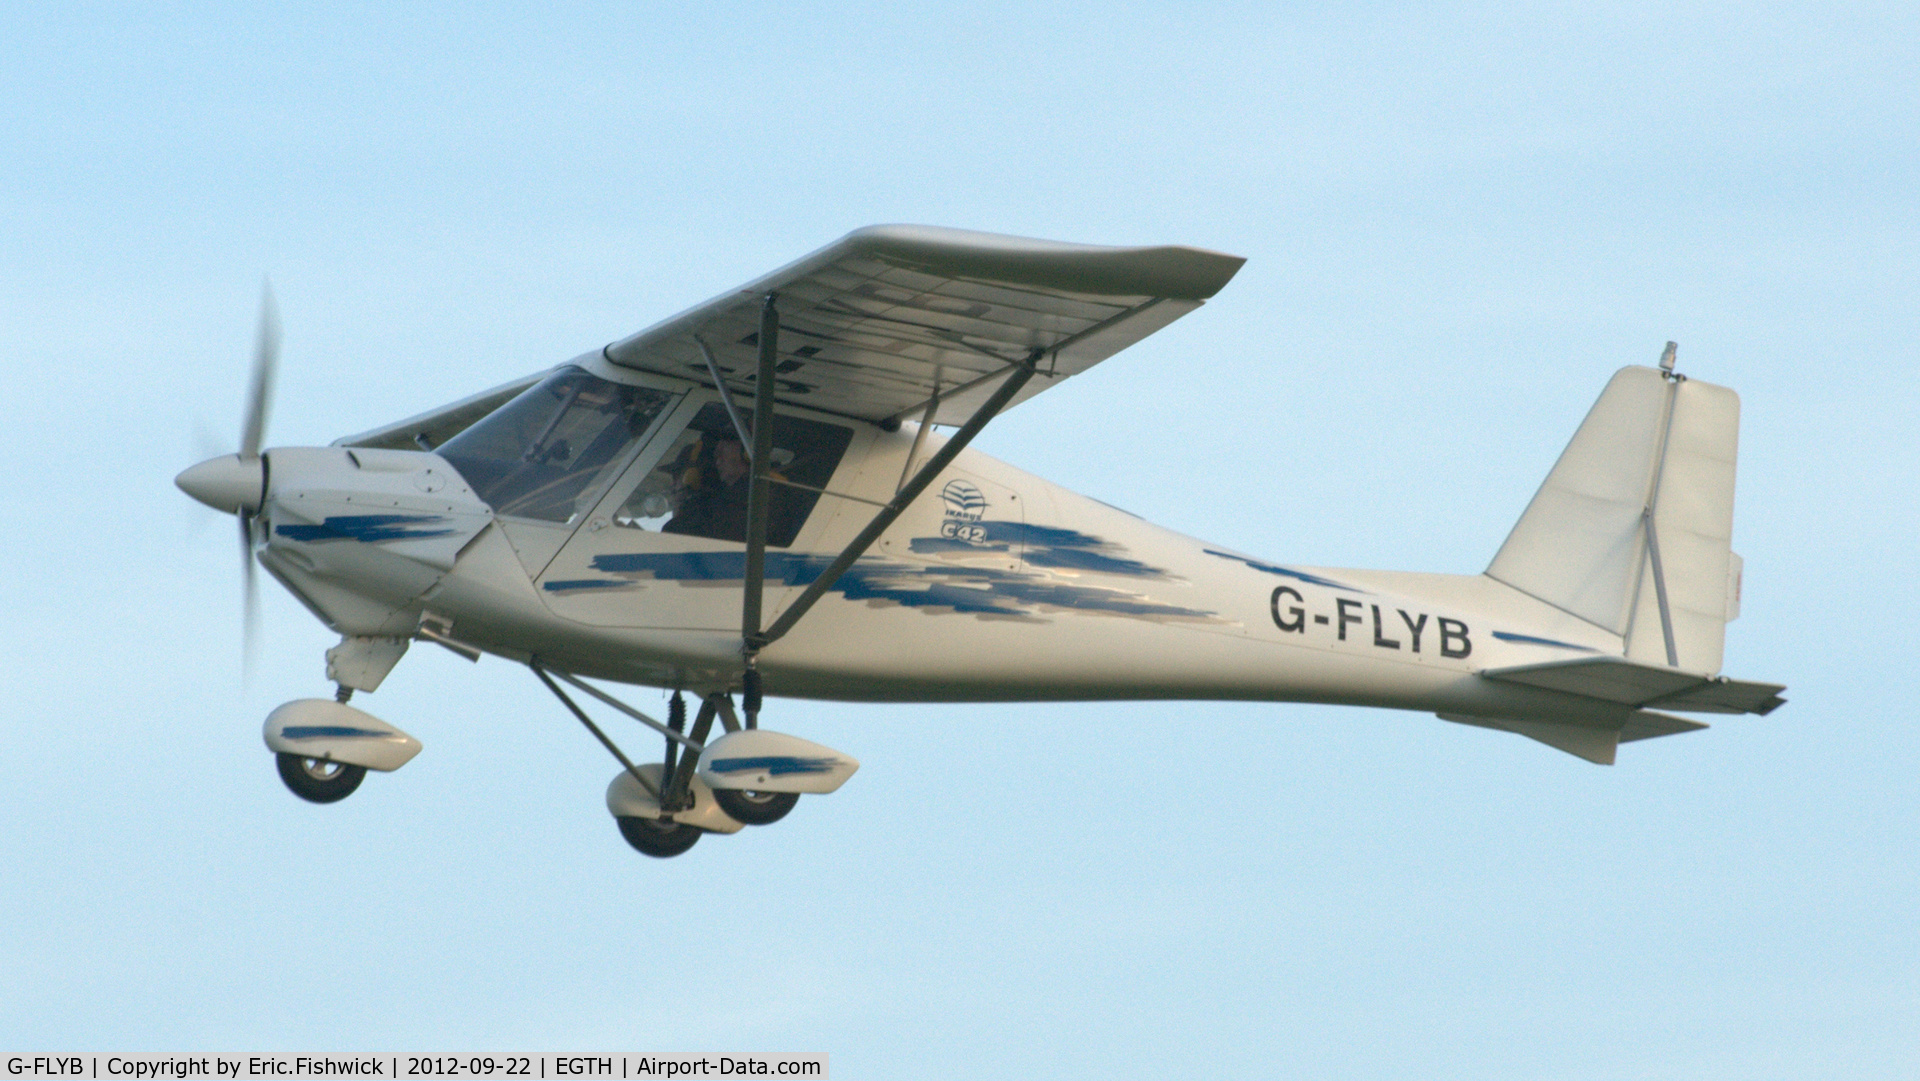 G-FLYB, 2003 Comco Ikarus C42 FB100 C/N 0309-6572, 43. G-FLYB departing Shuttleworth Uncovered - Air Show, Sept. 2012.